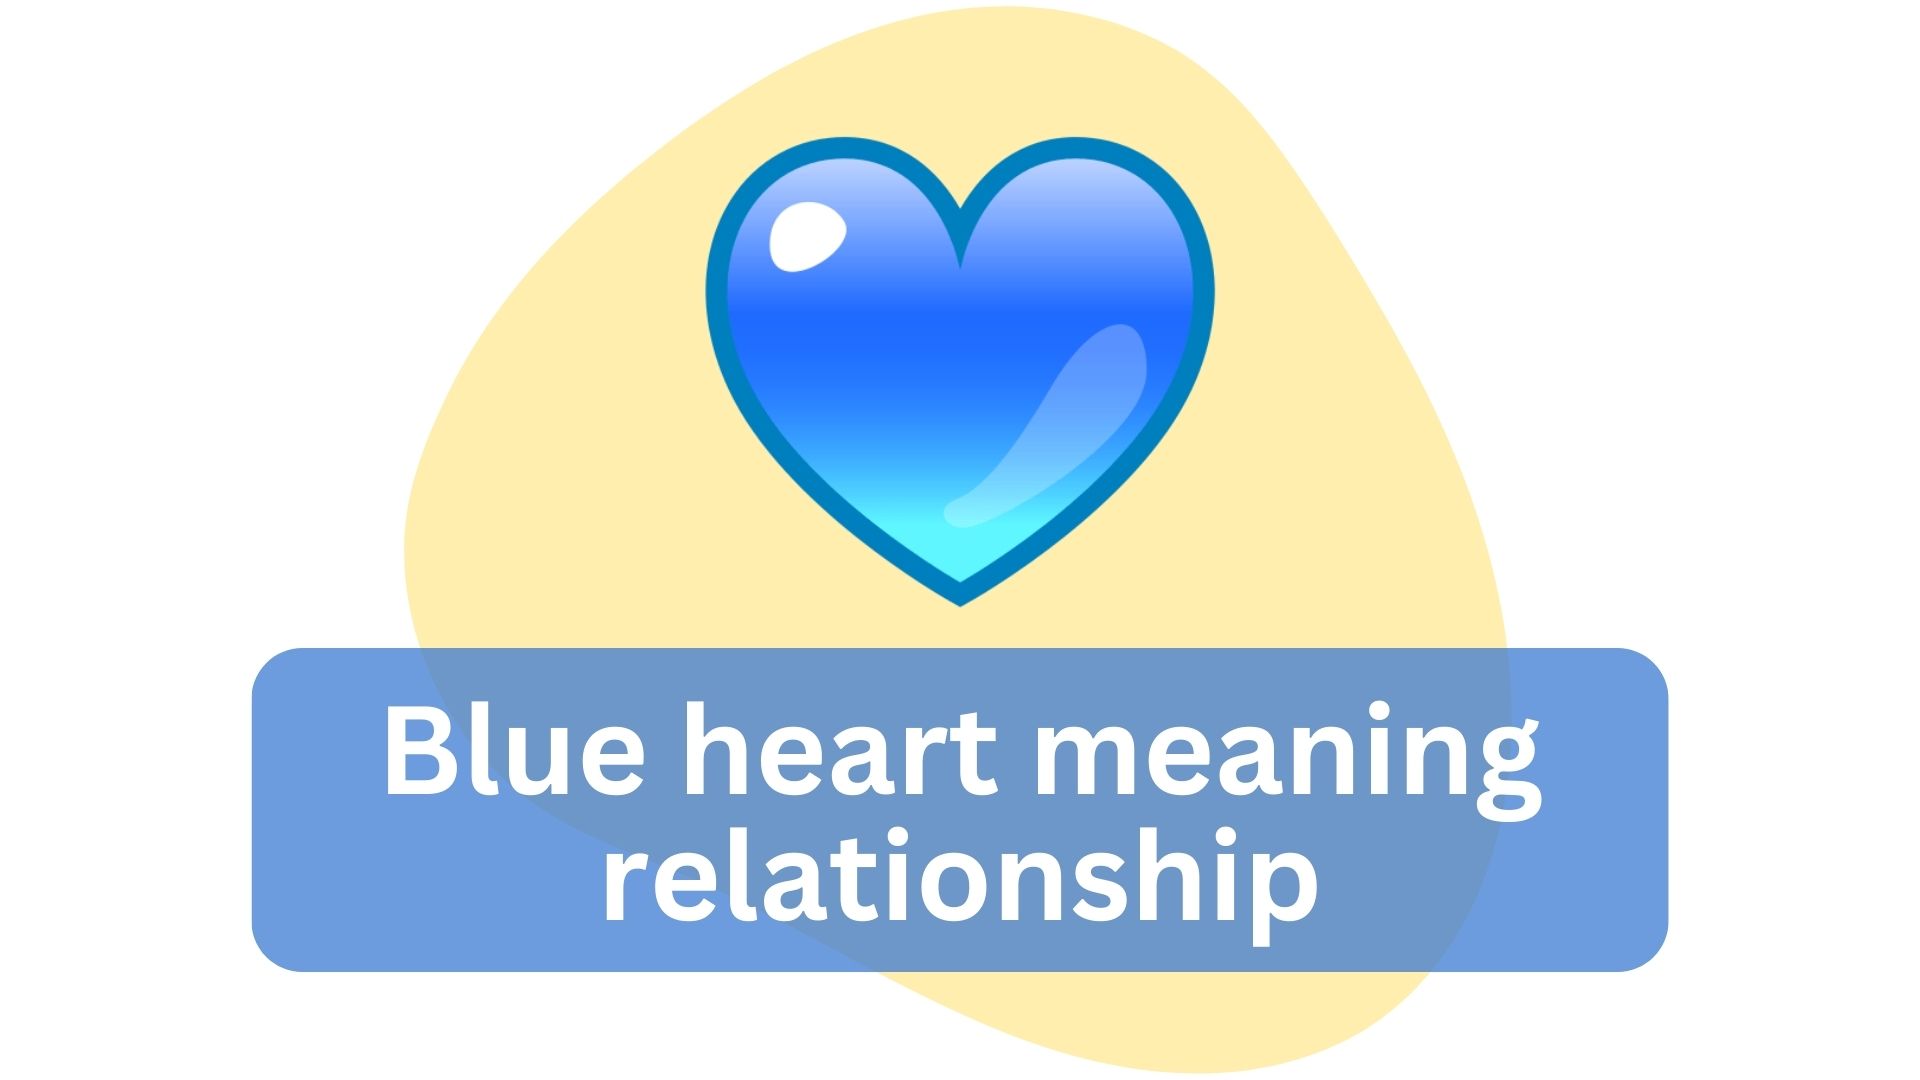 Blue heart meaning relationship